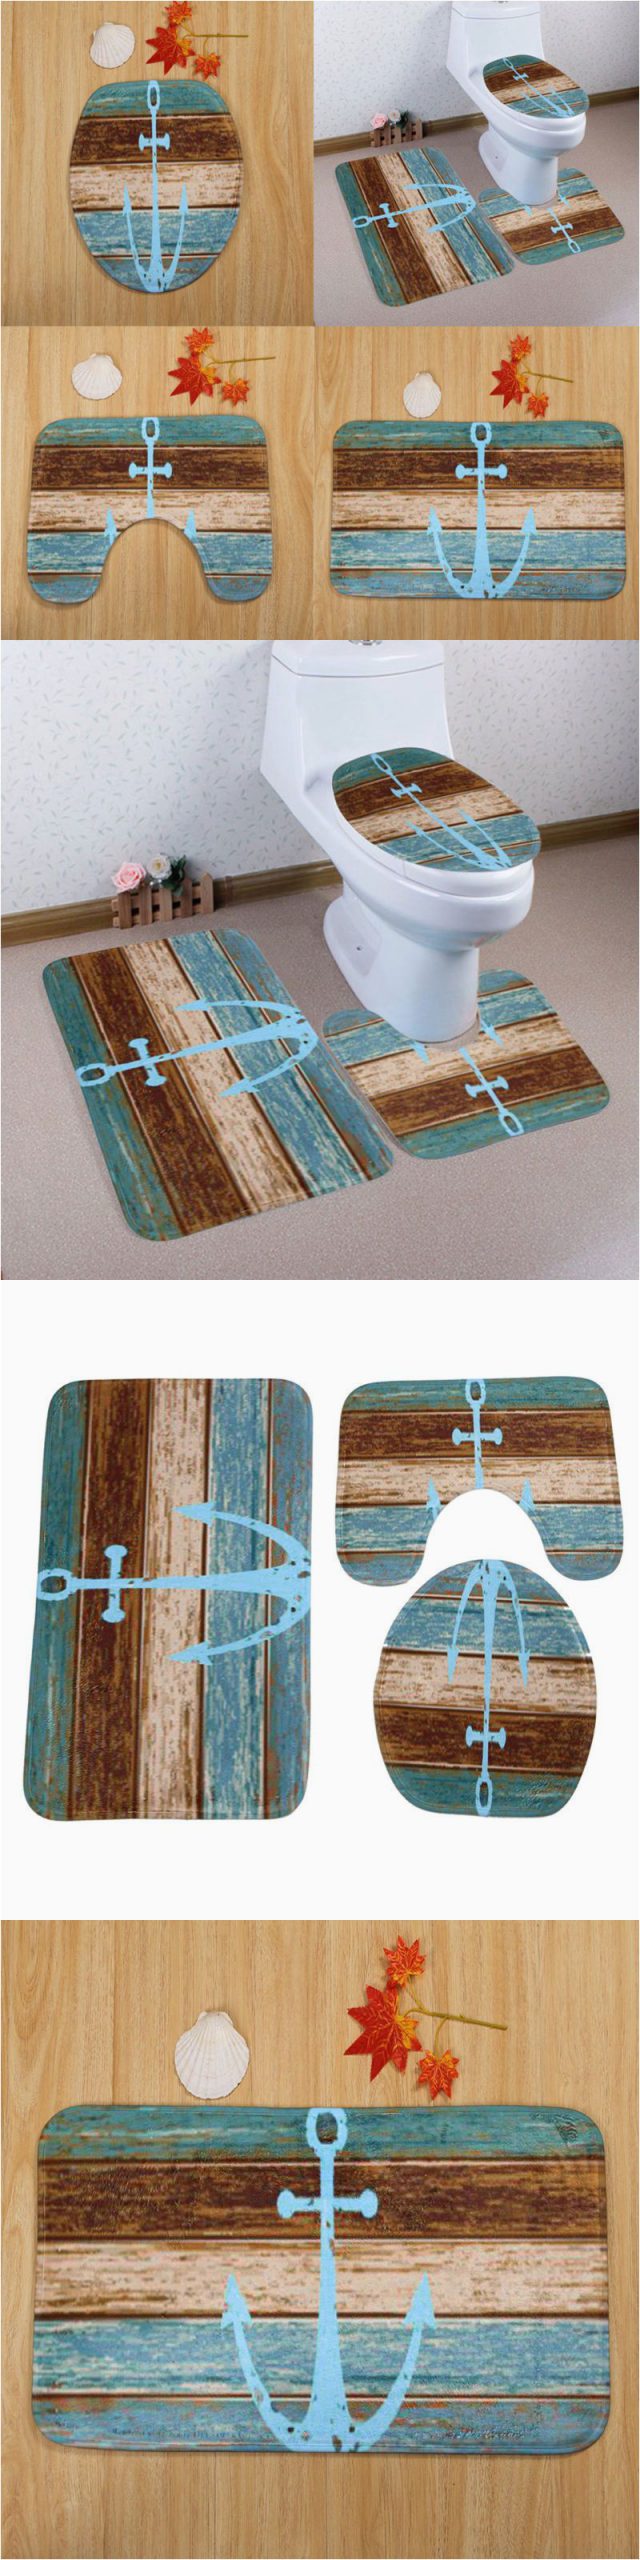 Bathroom Rugs and toilet Covers Bathmats Rugs and toilet Covers 3 Piece Nautical